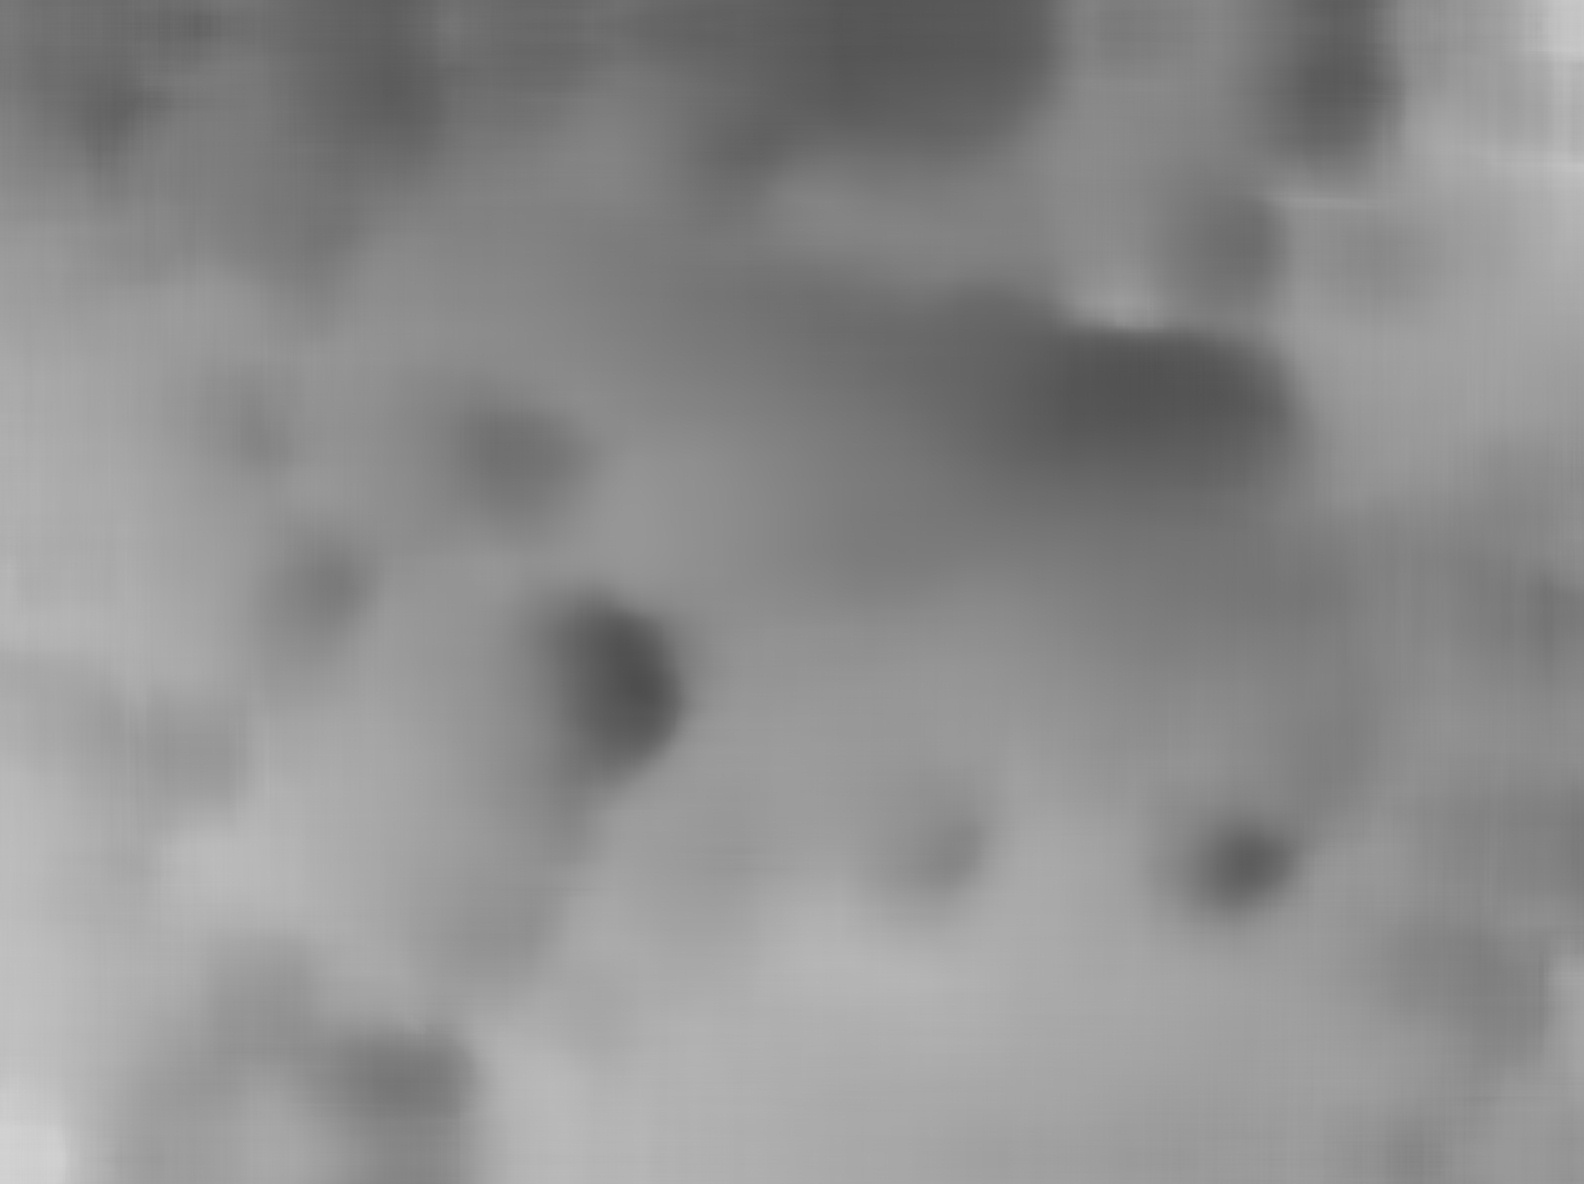 Nasa's Mars rover Curiosity acquired this image using its Mars Hand Lens Imager (MAHLI) on Sol 3543